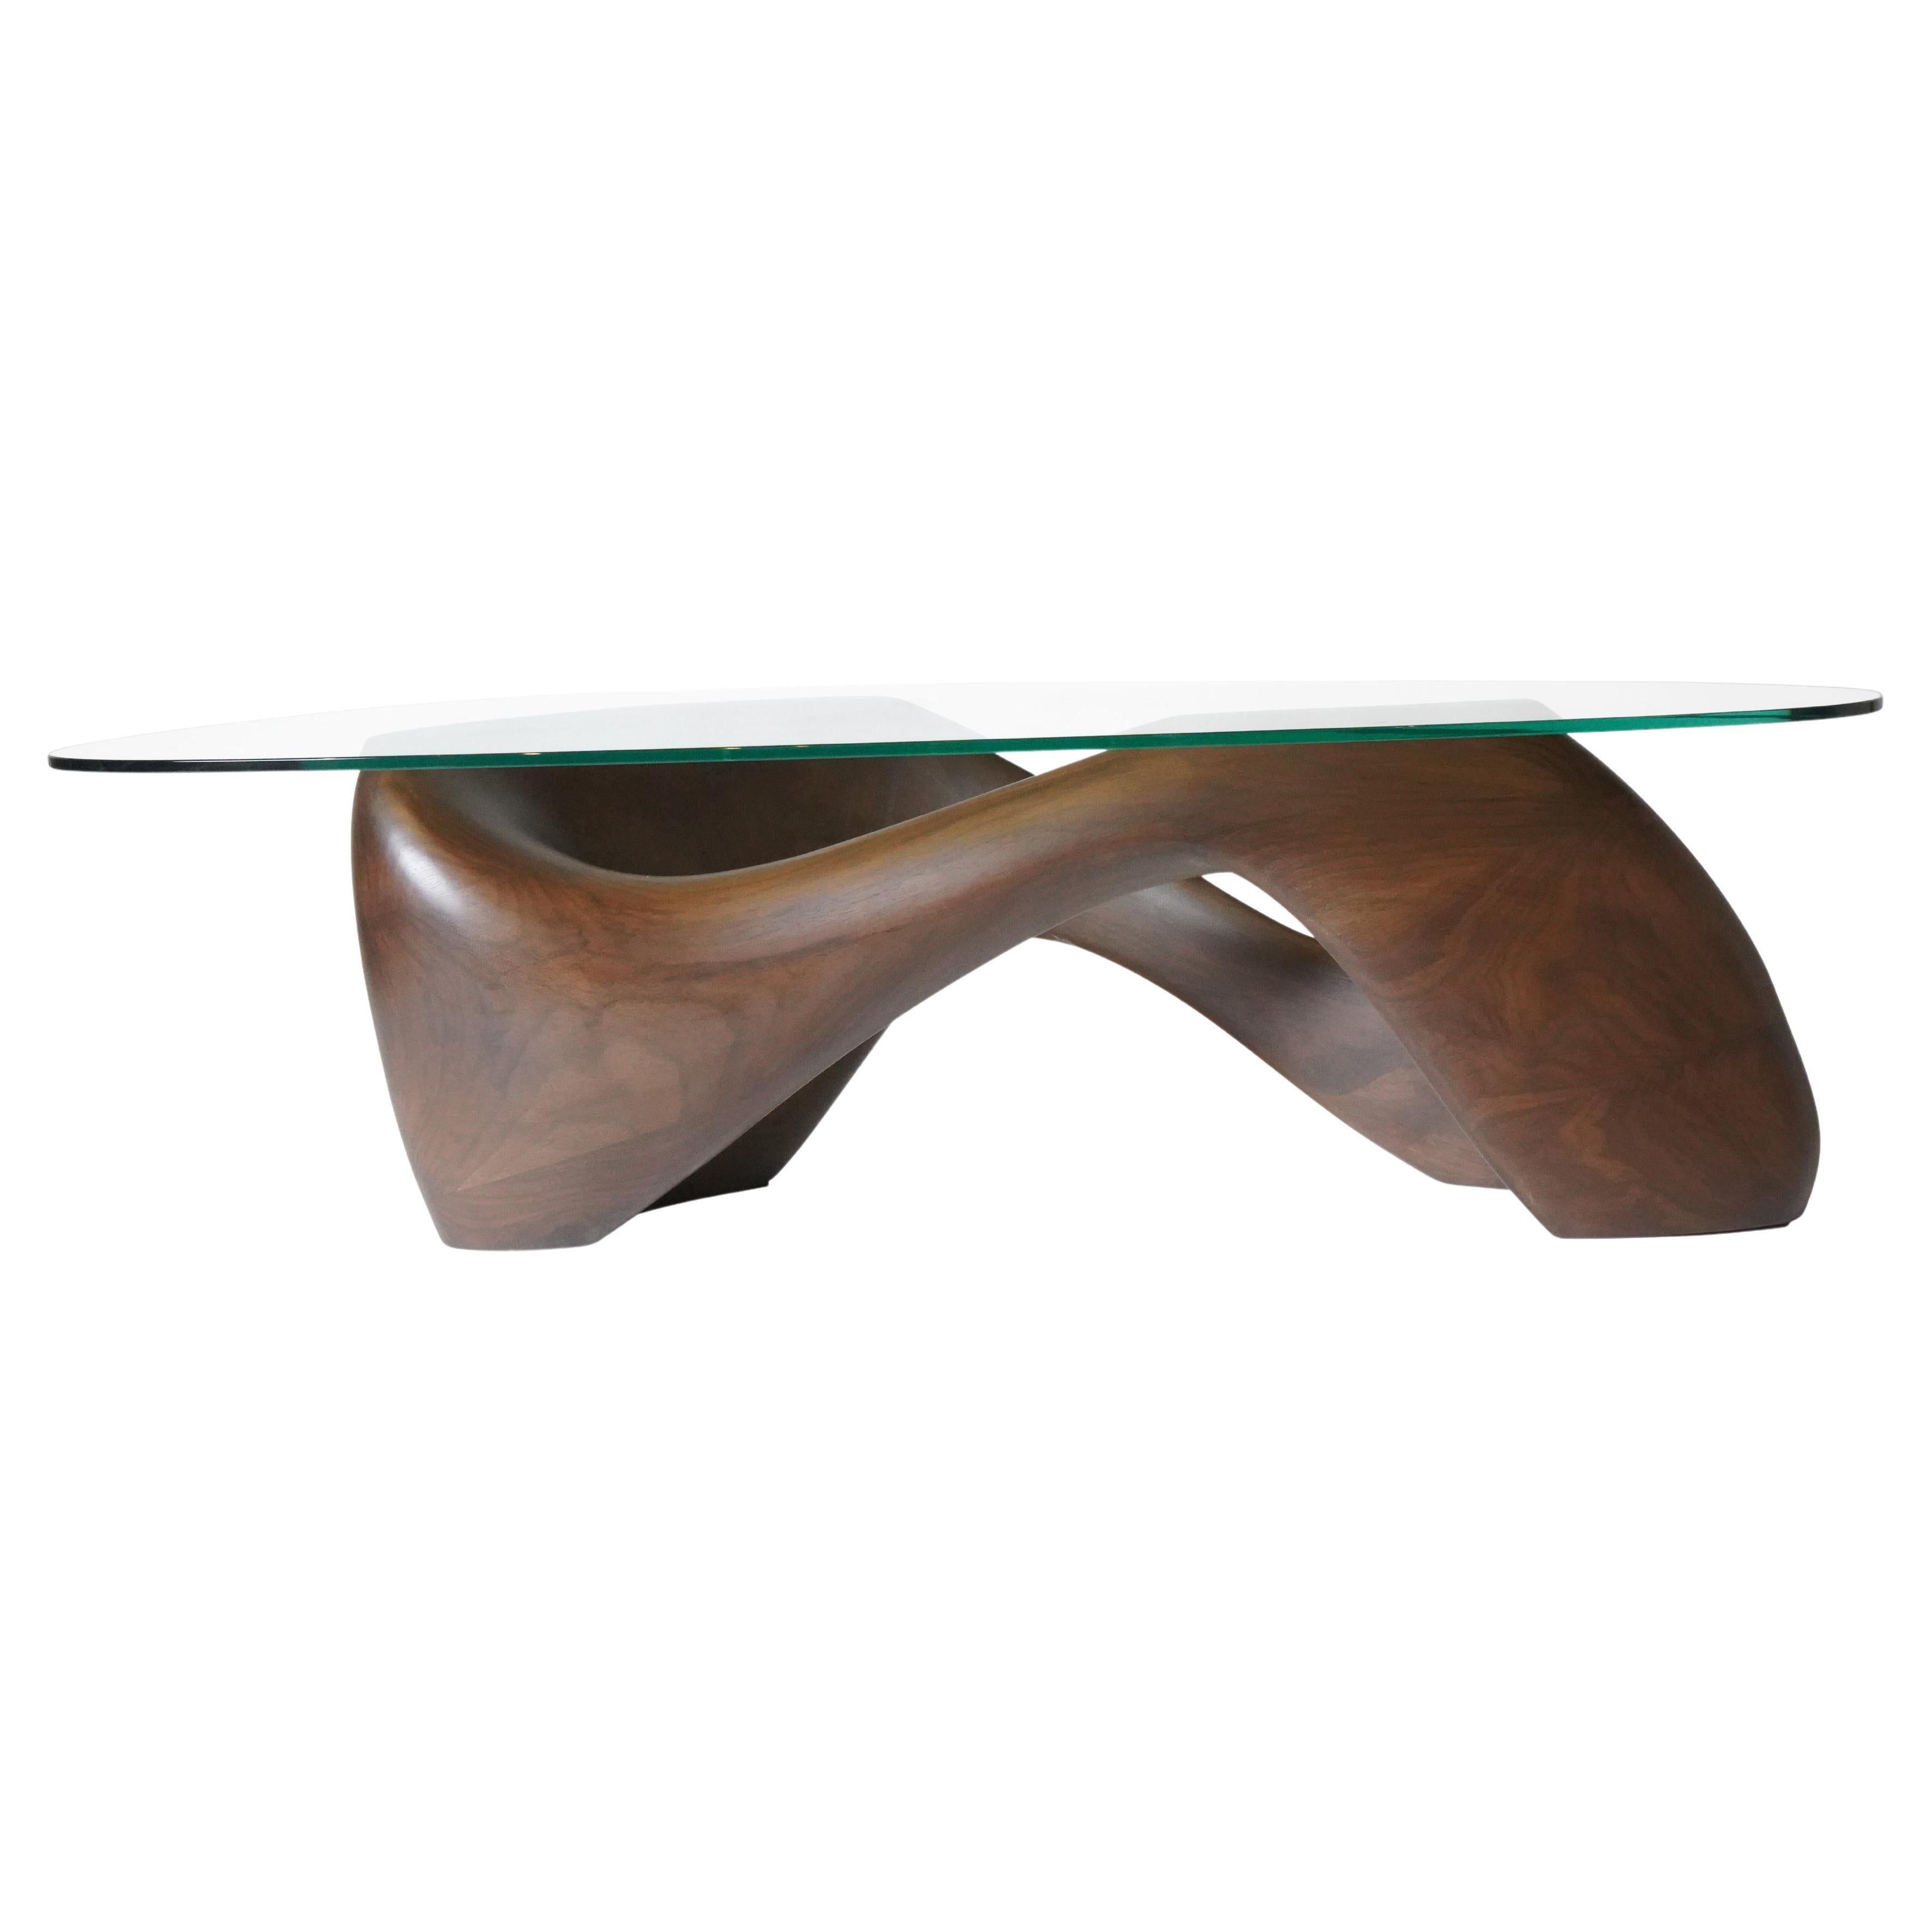 Lust coffee table is a futuristic sculptural art table with a dynamic form designed and manufactured by Amorph. Lust is made out of walnut wood with Montana stain. Measures: Lust comes with 1/2